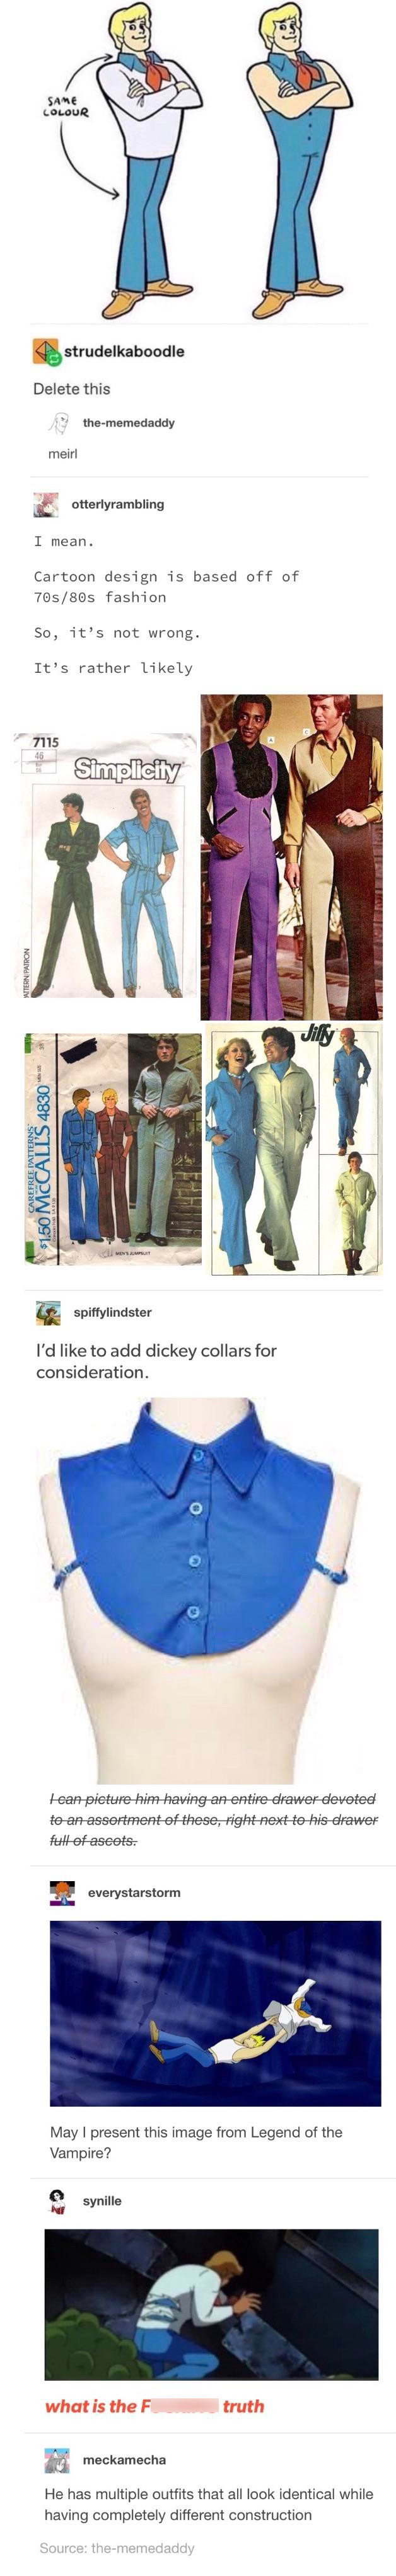 cartoon - Same Colour strudelkaboodle Delete this thememedaddy meirl otterlyrambling I mean. Cartoon design is based off of 70s80s fashion So, it's not wrong. It's rather ly 7115 Simplicity Attern Patron Jilly Carefree Patterns $1.50 Mccalls 4830 Cmsar Me